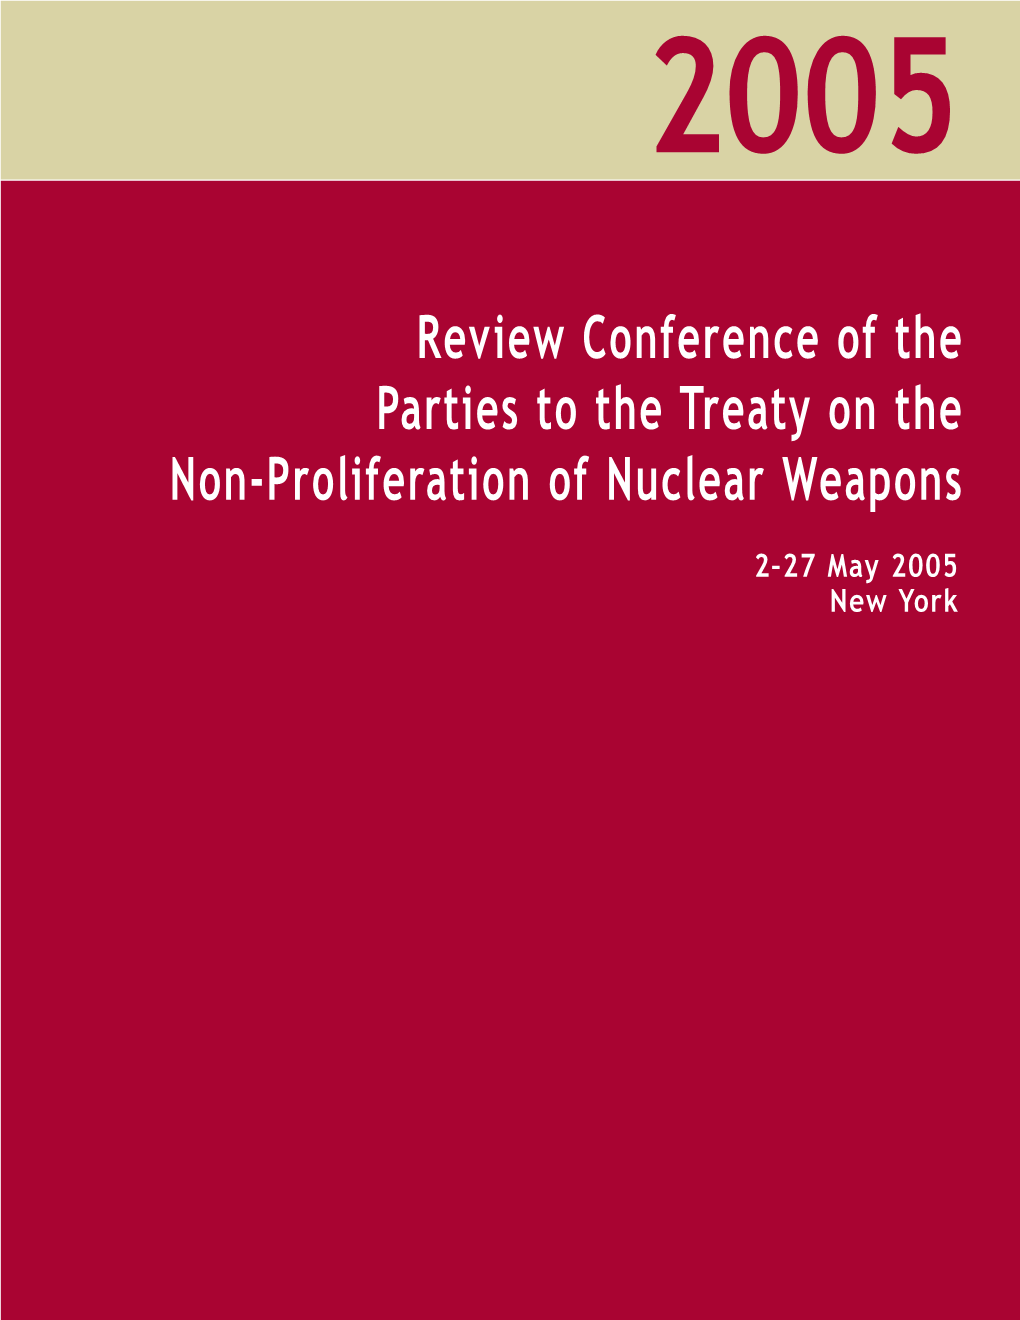 Review Conference of the Parties to the Treaty on the Non-Proliferation of Nuclear Weapons